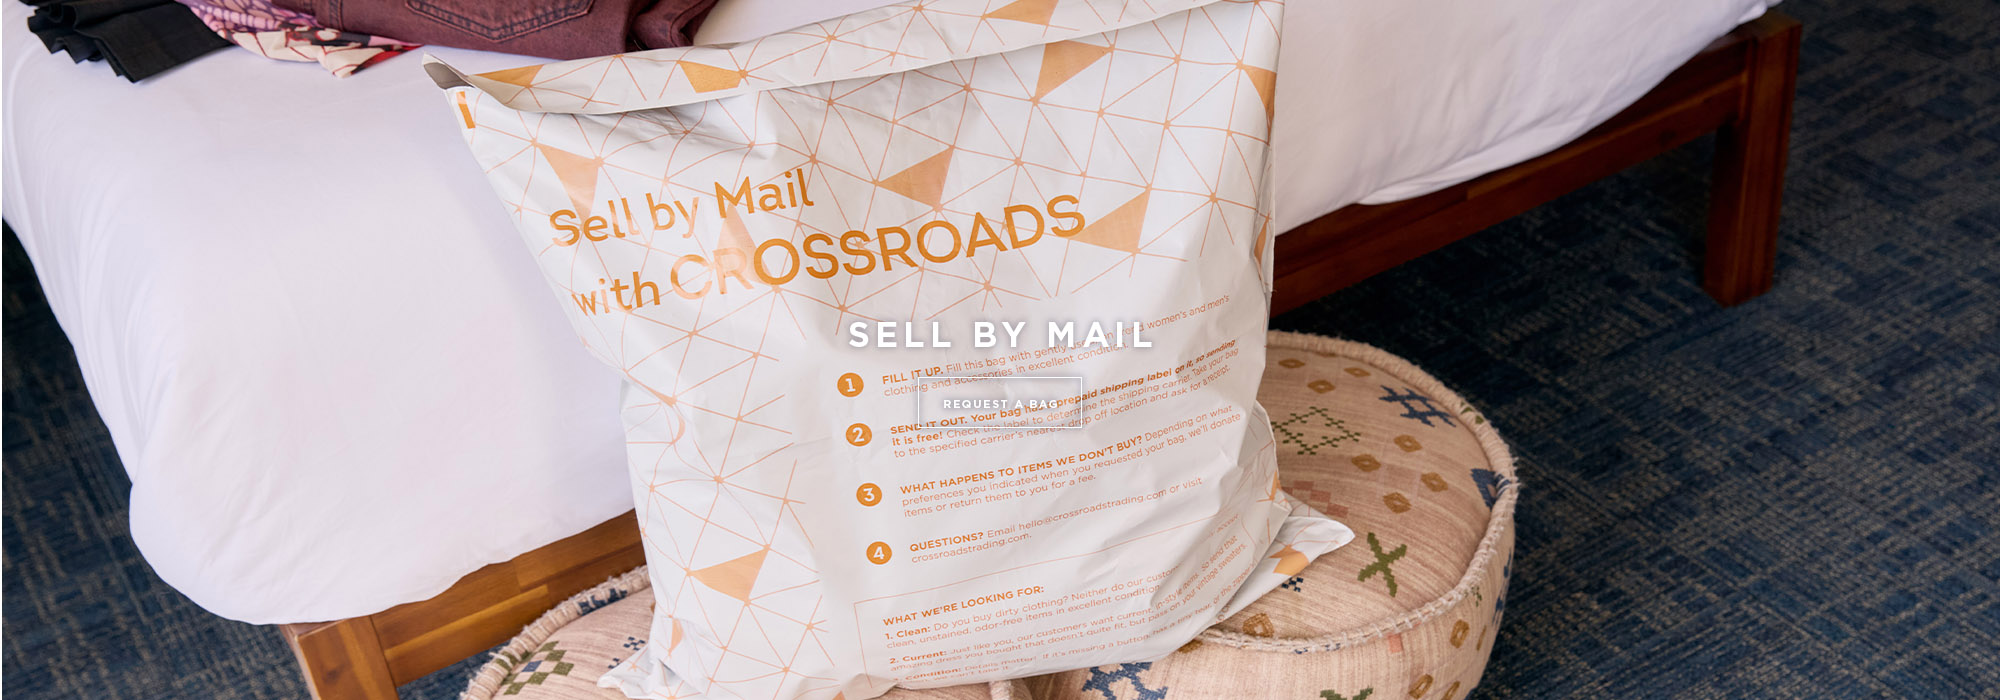 Crossroads sell by mail white plastic bag photo text reads sell by mail request a bag